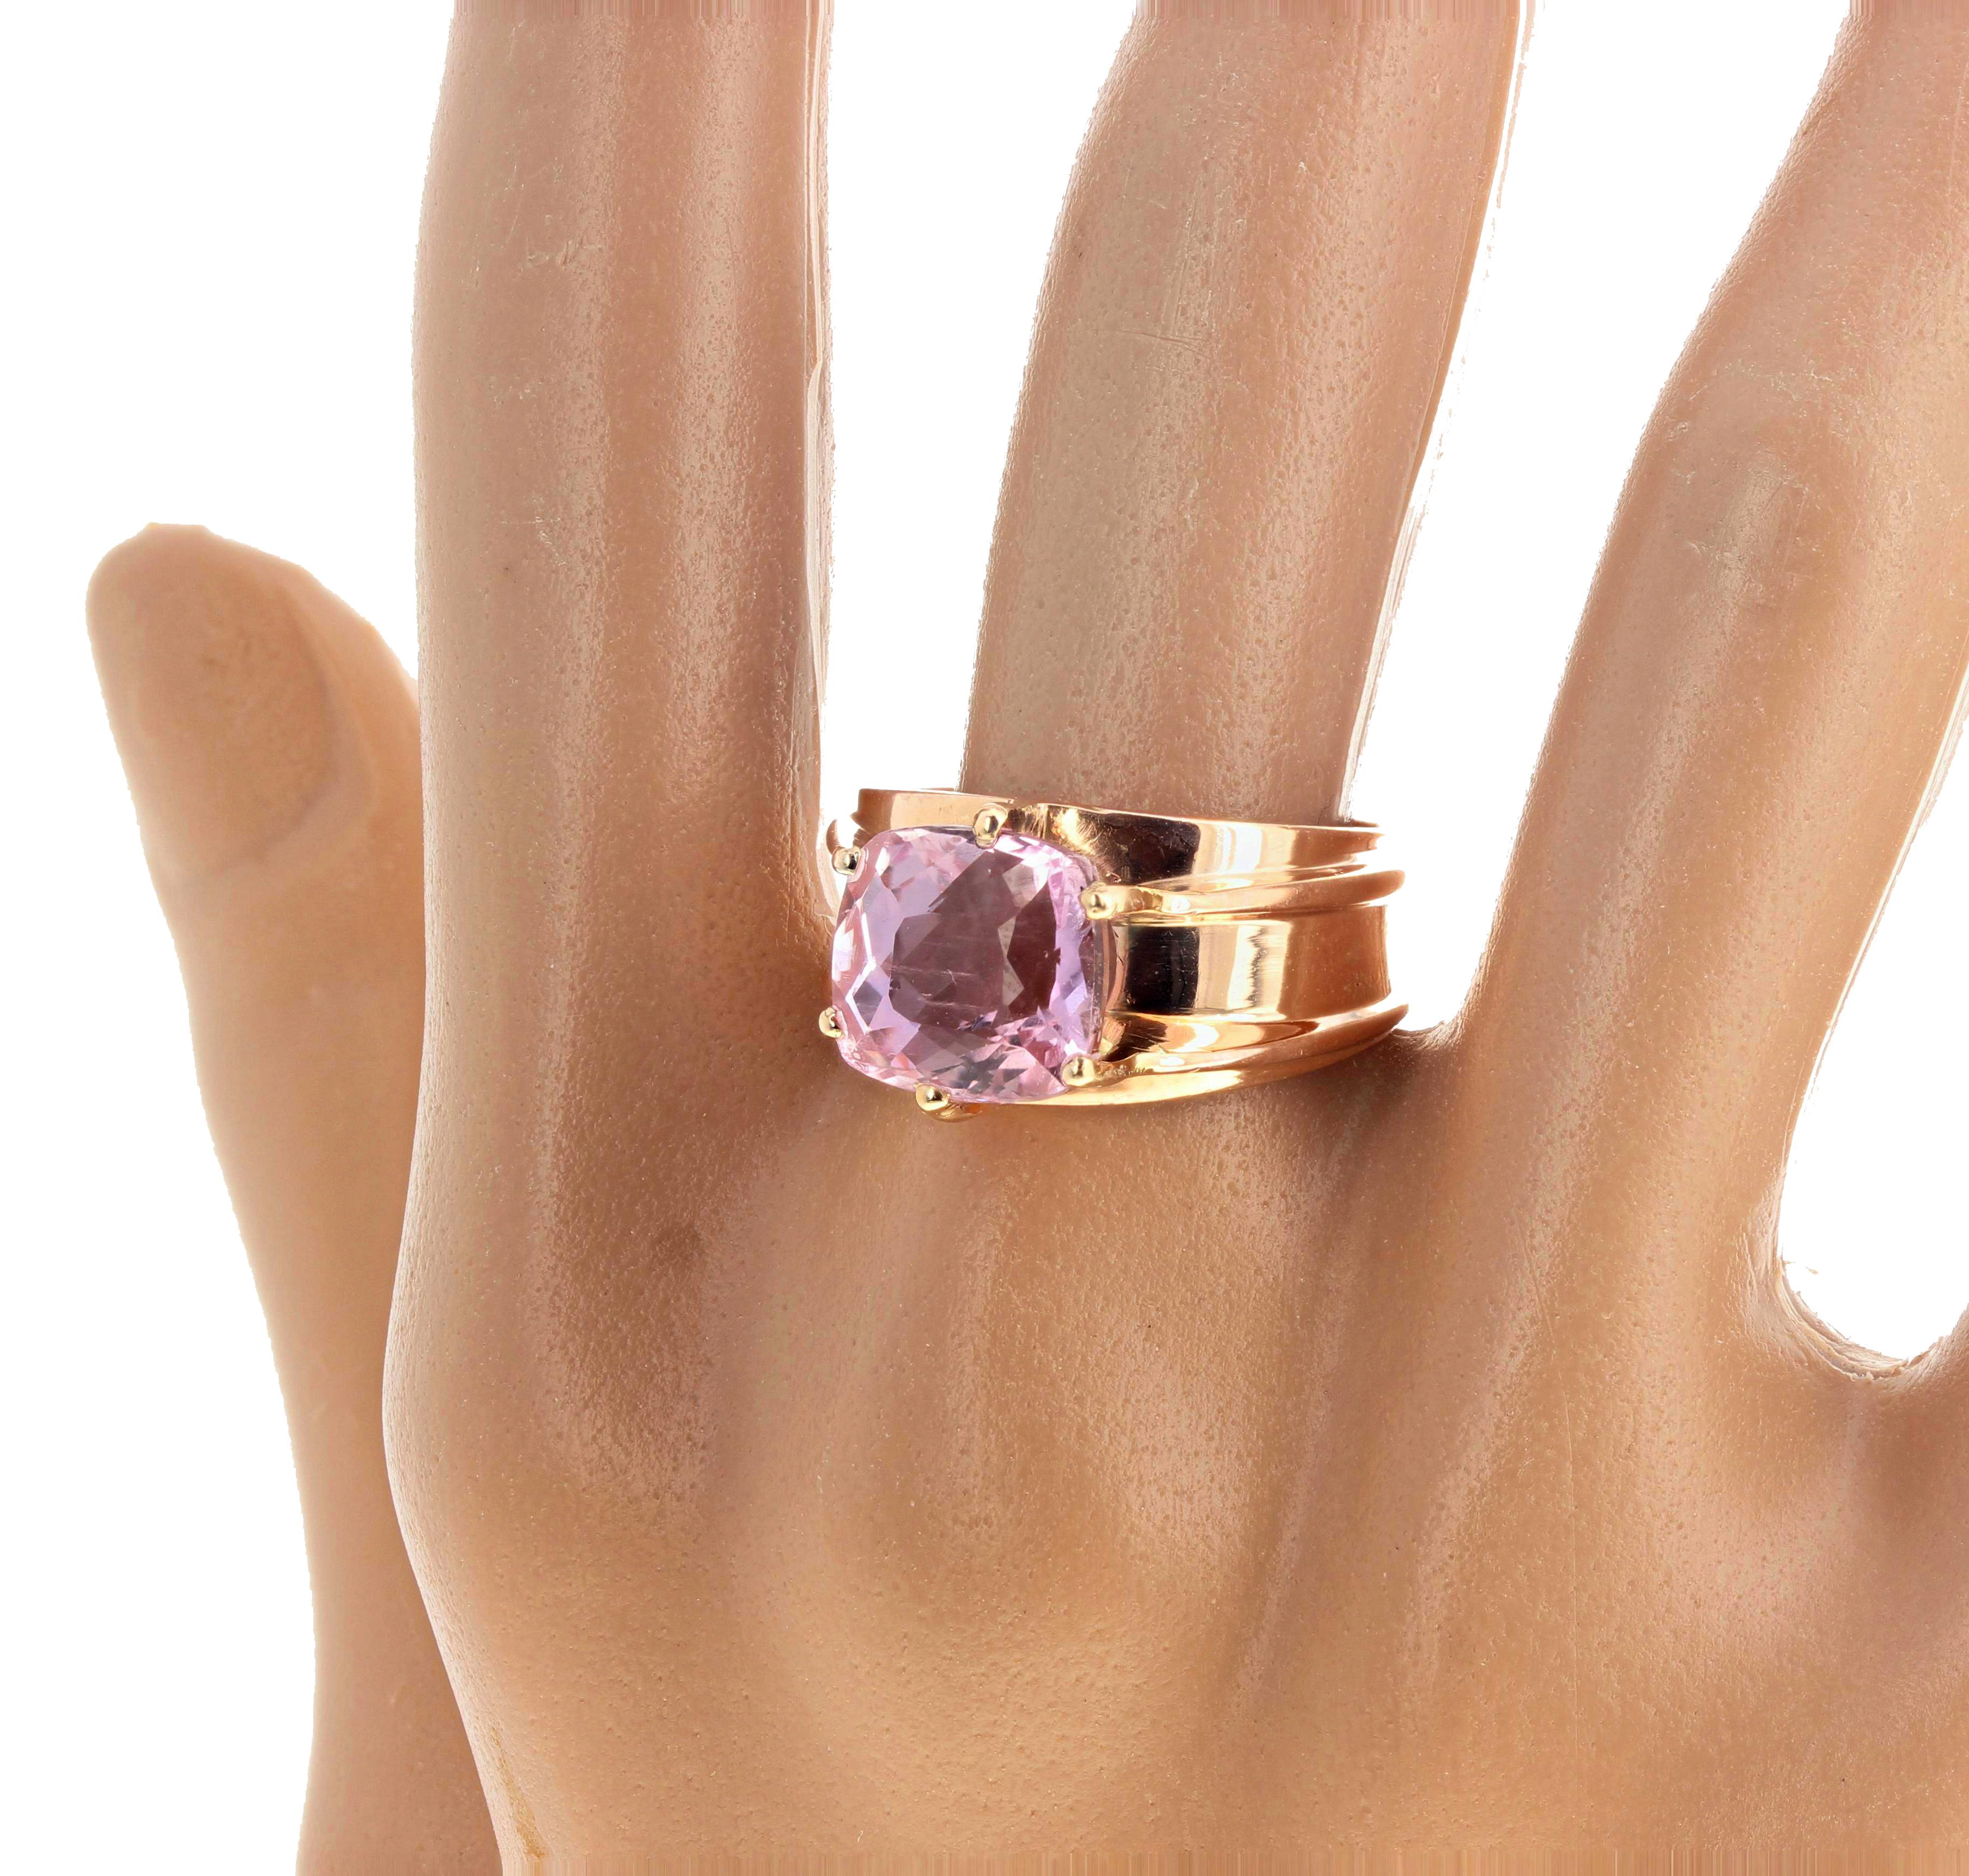 Gorgeous natural 5.91 carat pink Kunzite set in this lovely gold ring sizable 7.5 (we size for free). This beautiful elegant pink Kunzite (10 mm x 10 mm) is eye clean with no eye visible inclusions.  If you wish faster delivery on your purchase